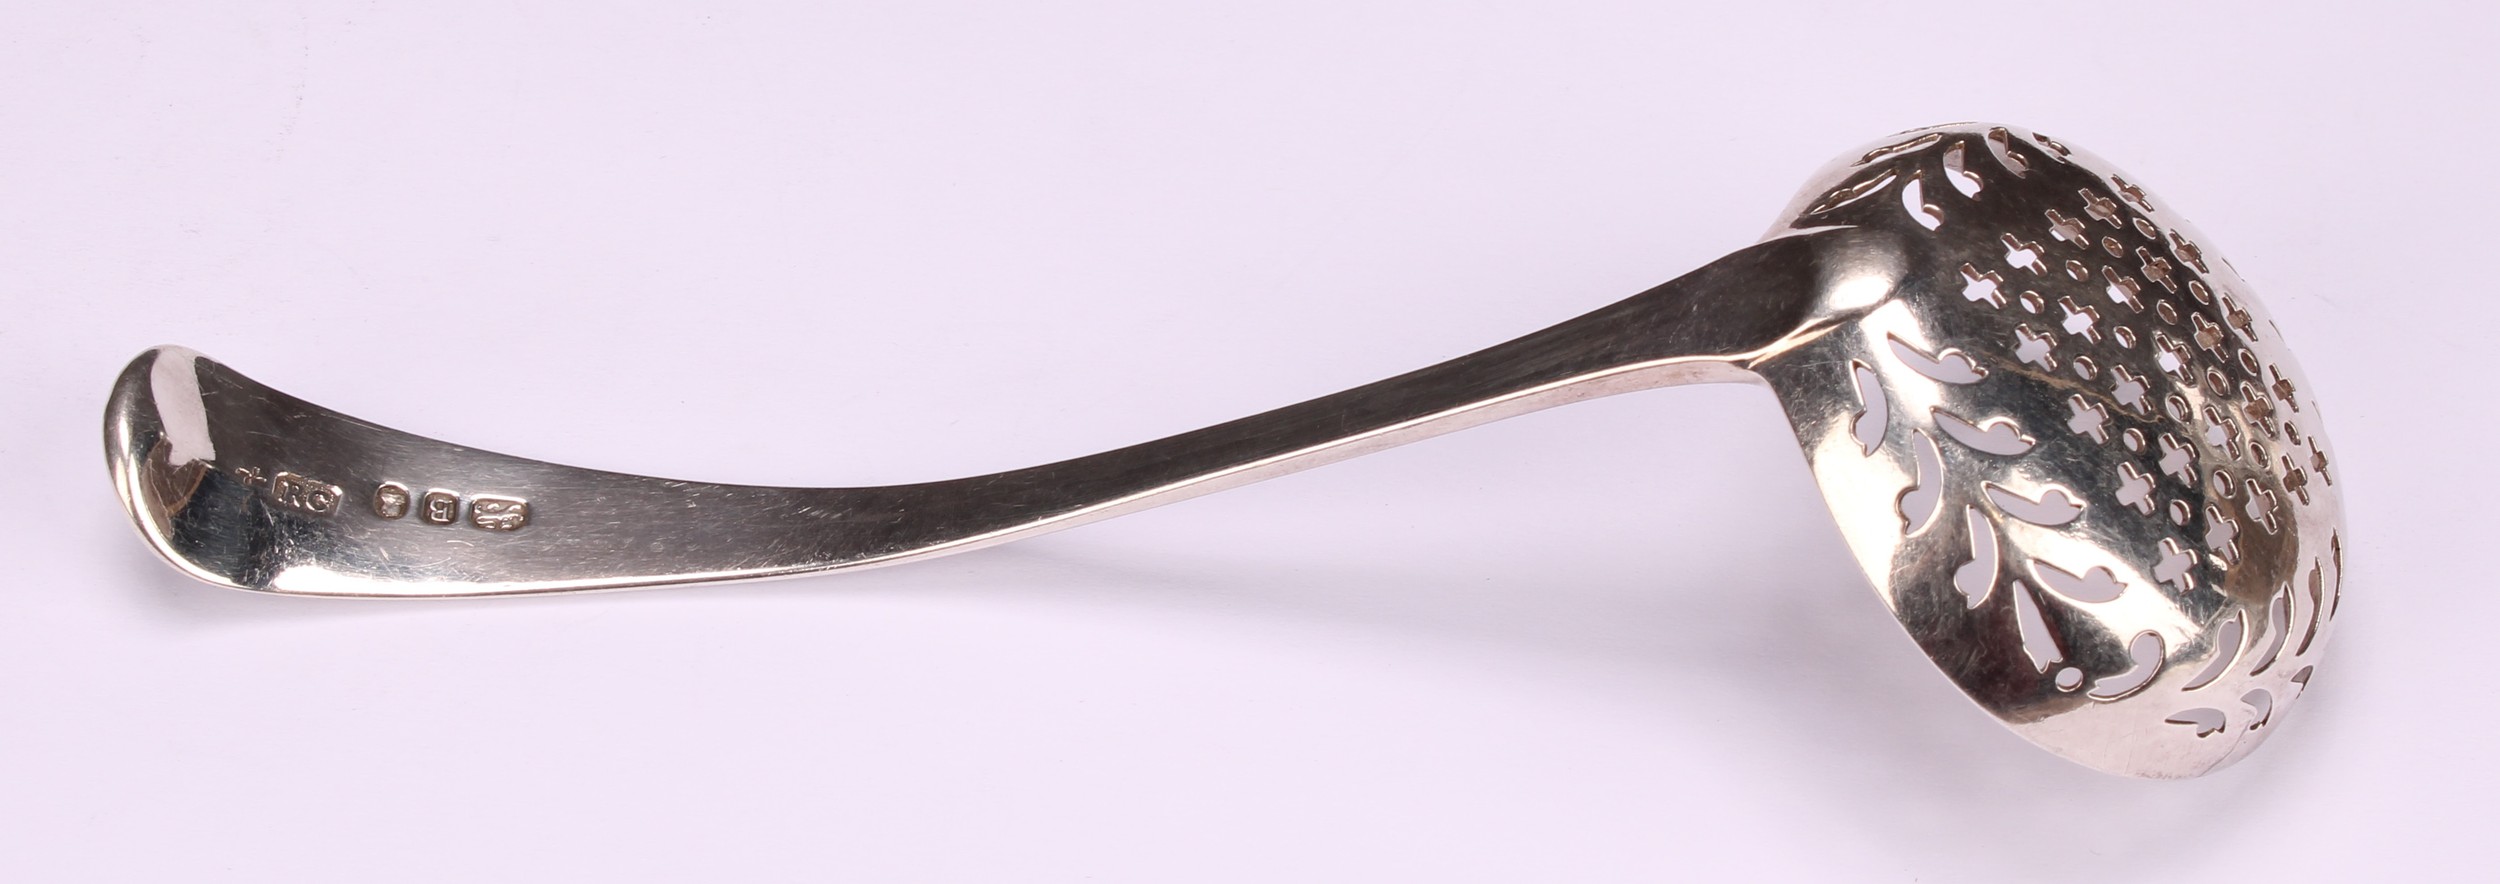 A George III silver Old English pattern sifter spoon, 15.5cm long, Richard Crossley, London 1797 - Image 3 of 4